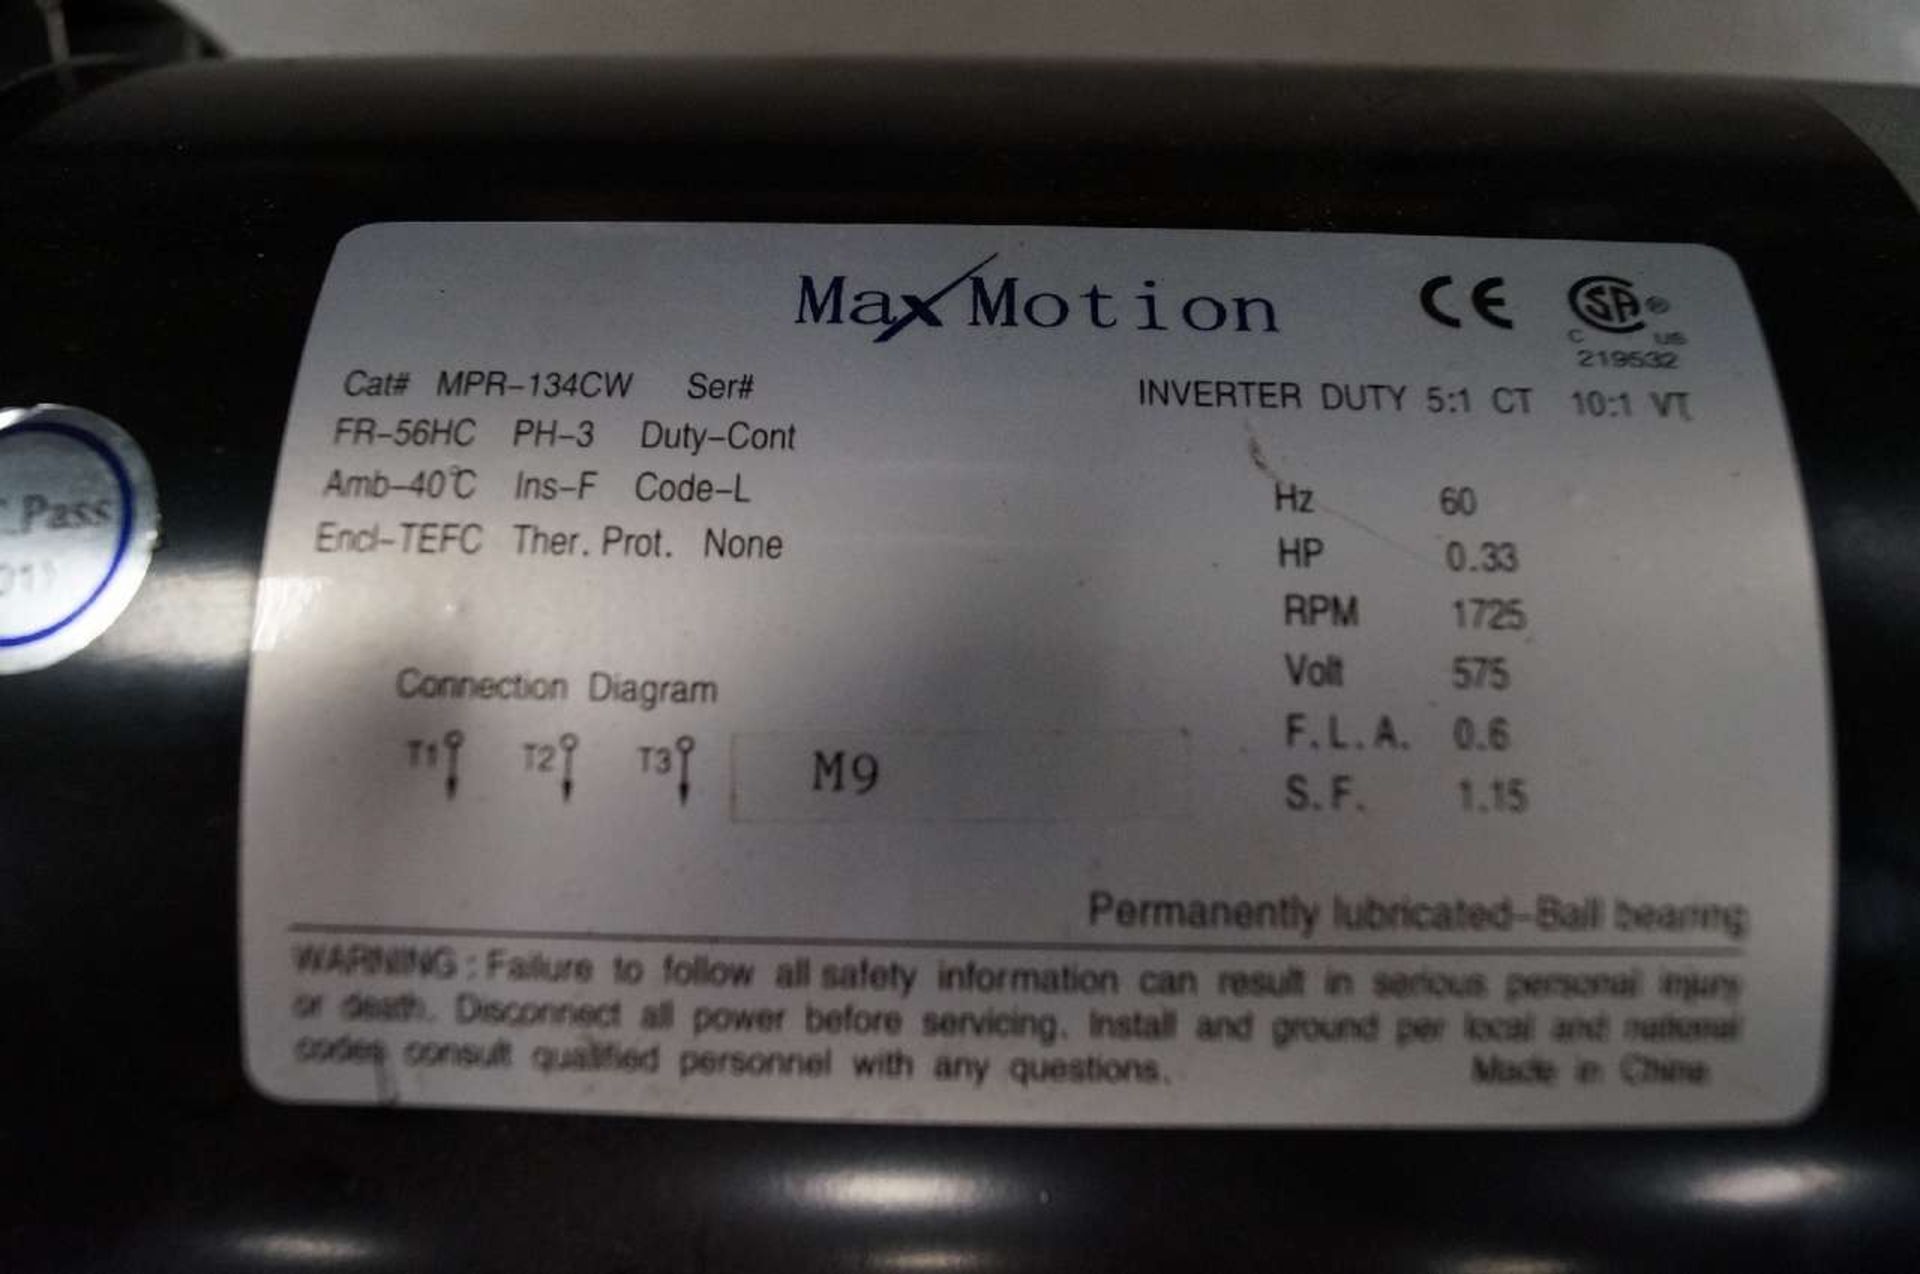 Max Motion Cat No. MPR-134CW Electric Motor - Image 2 of 2